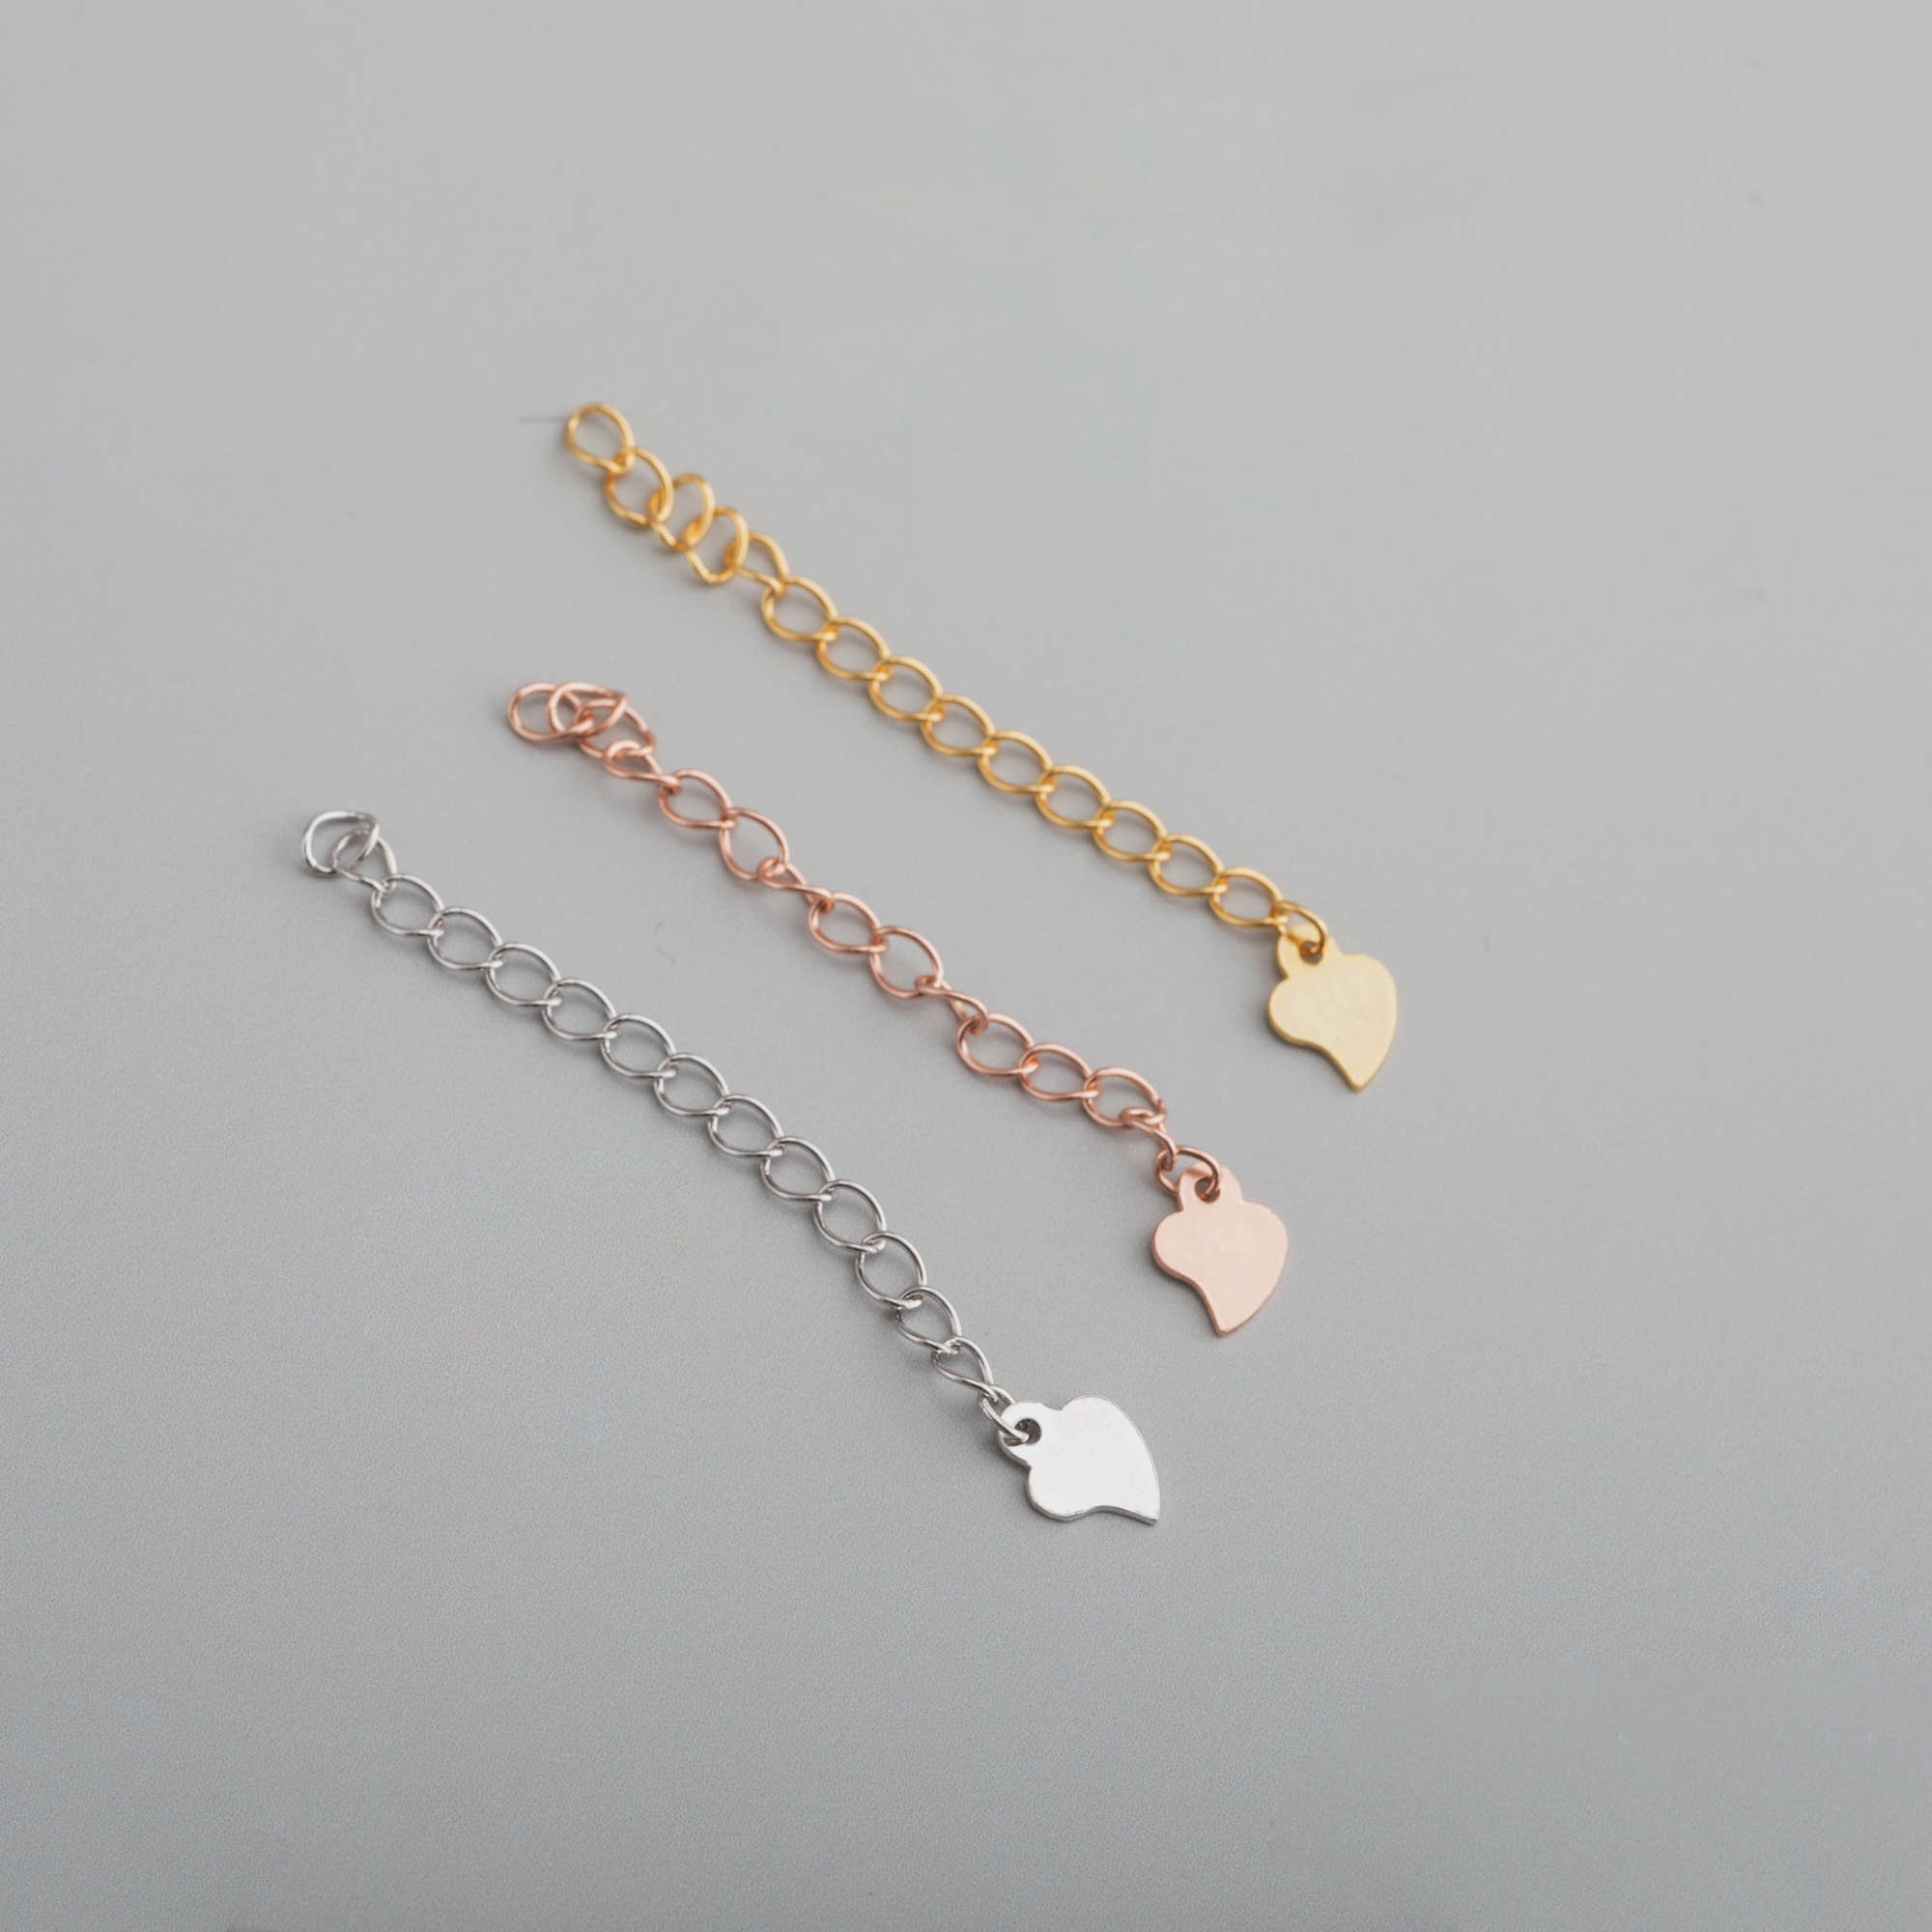 1Pcs 2 Inches Silver Rose Gold Solid 925 Sterling Silver Necklace Extension Chain Supplies 1316001 - Click Image to Close